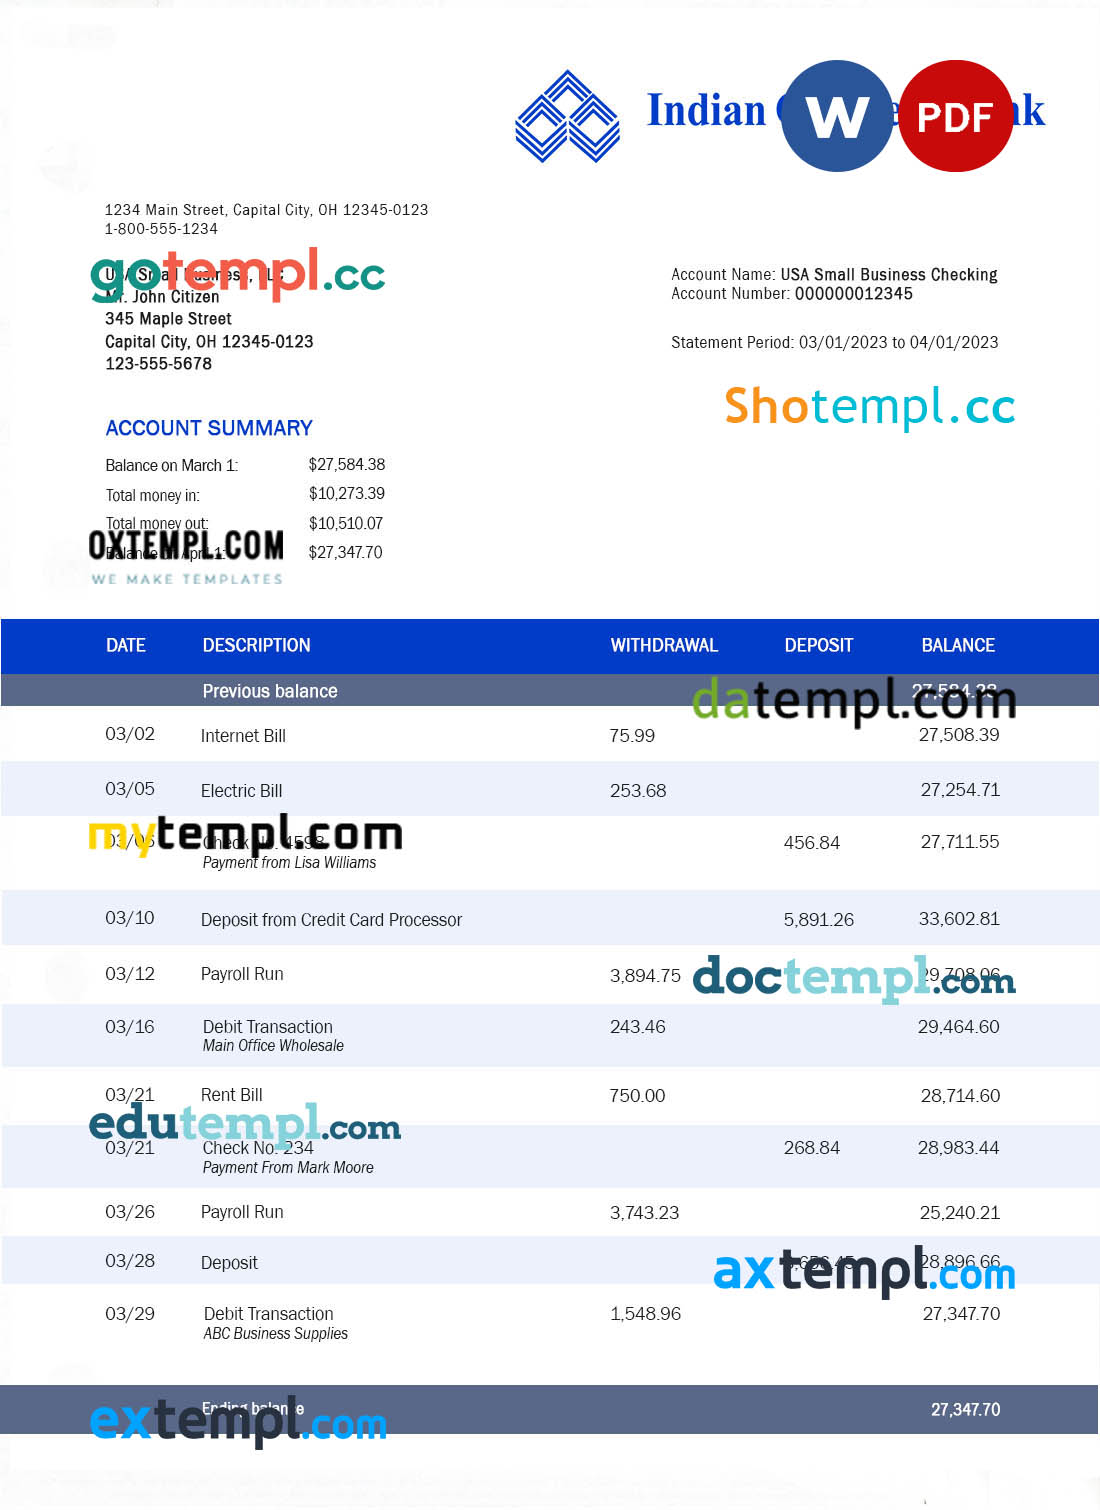 editable template, Indian Overseas Bank organization account statement Word and PDF template